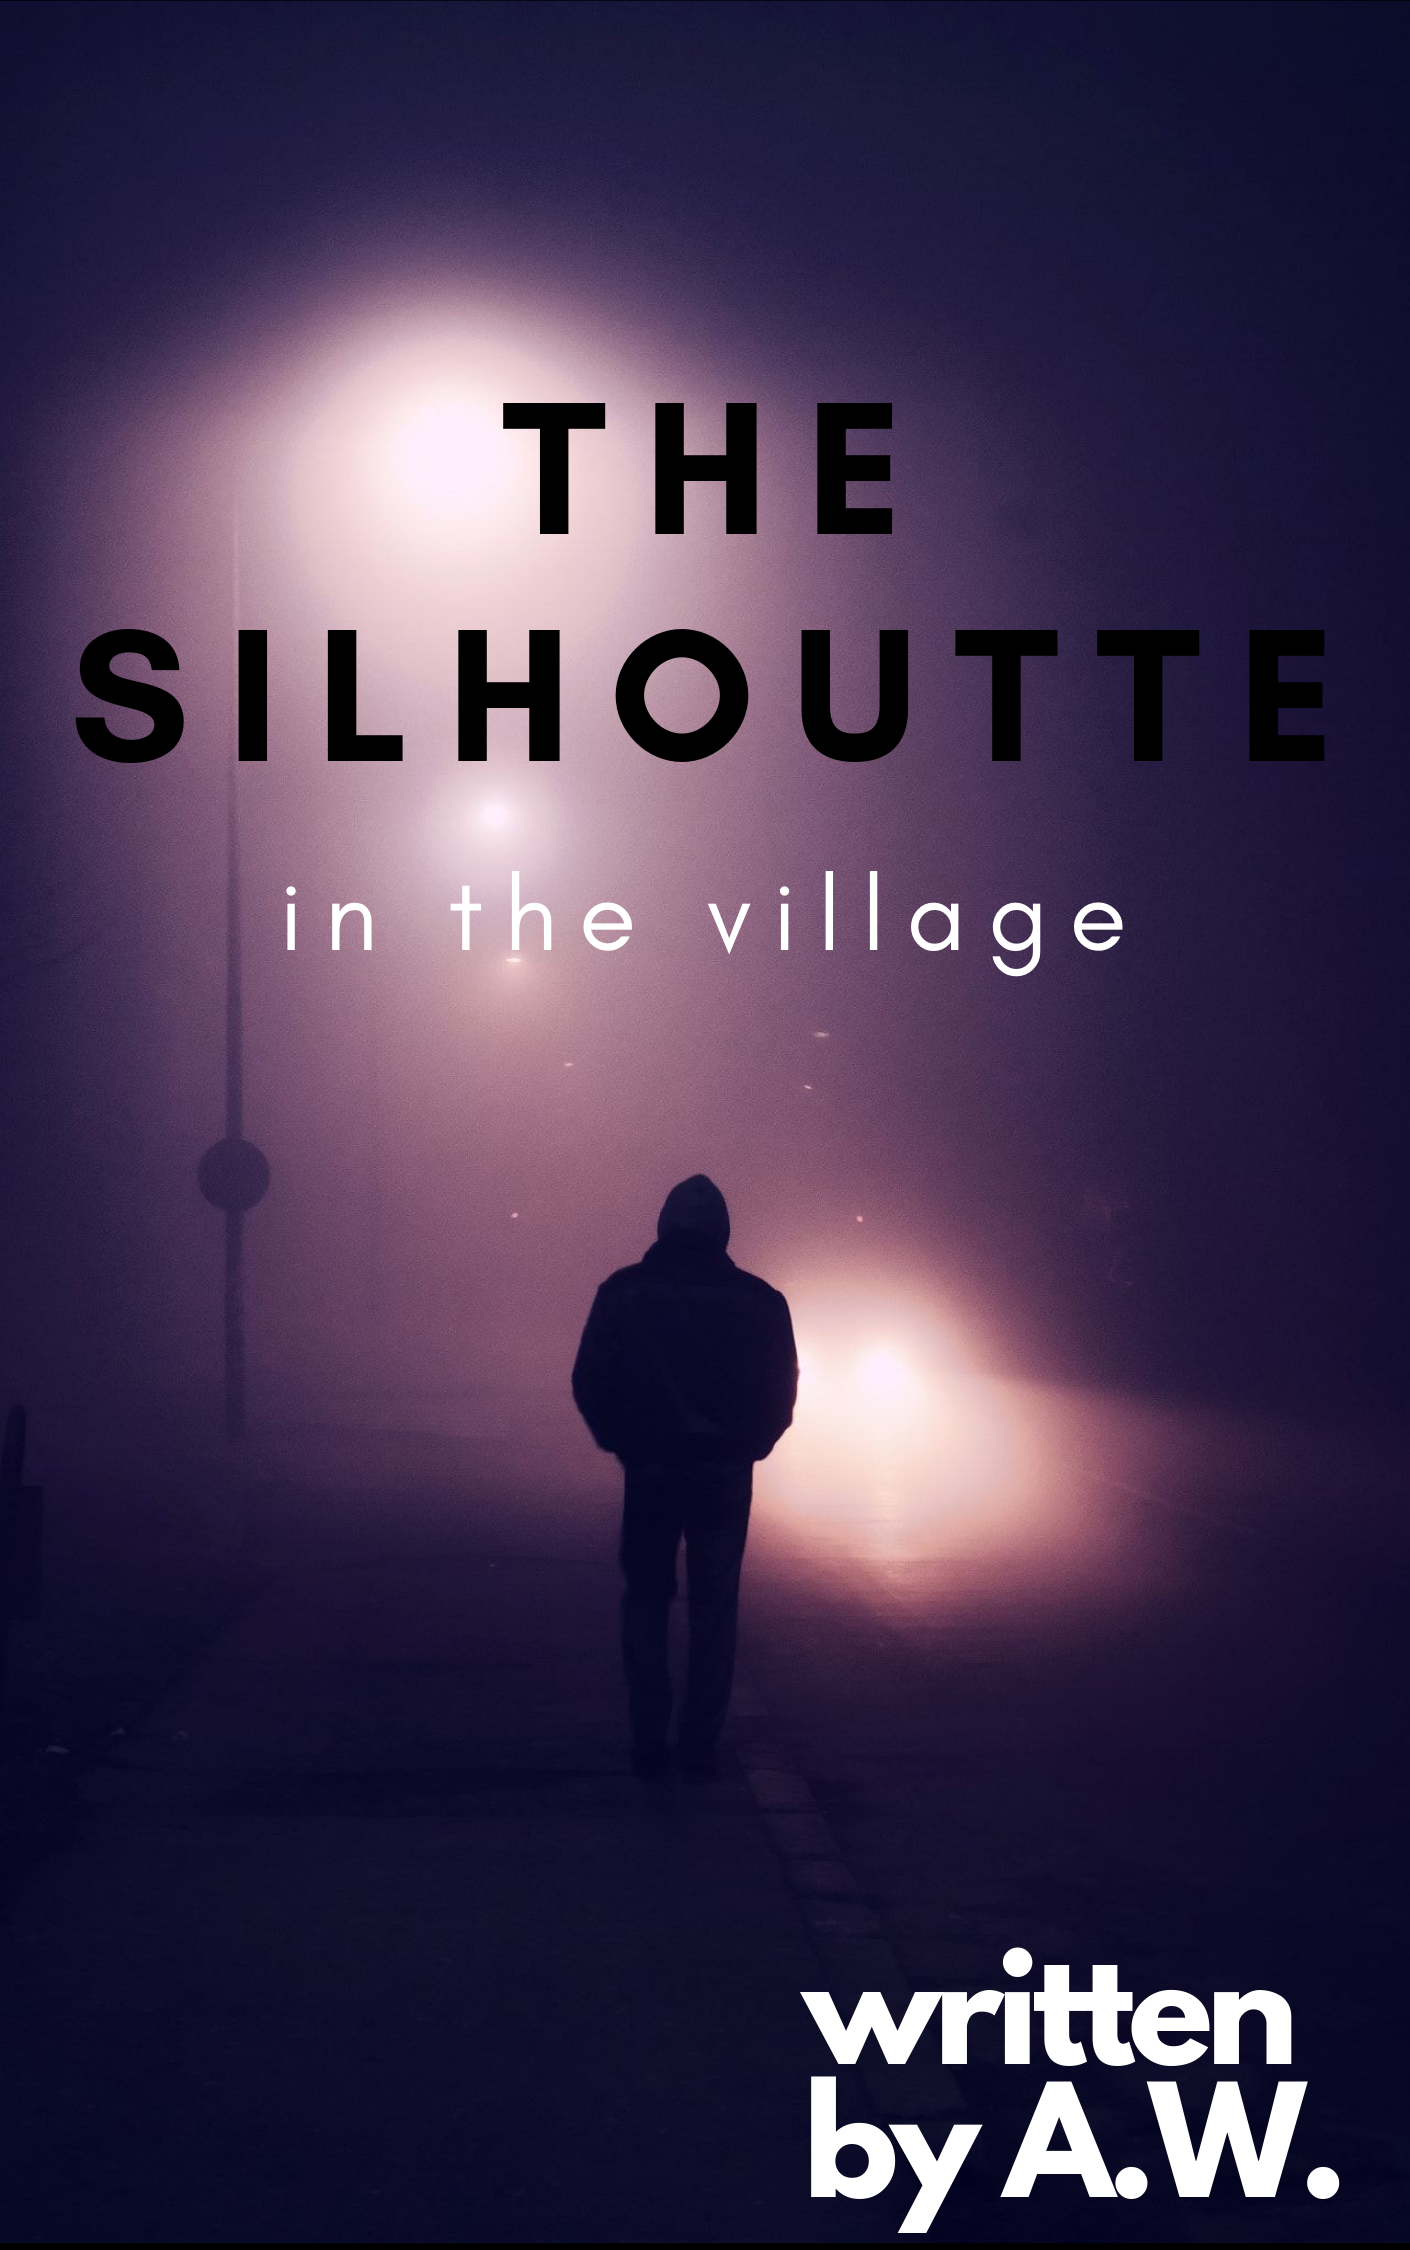 FREE: The Silhouette in the Village by A.W.